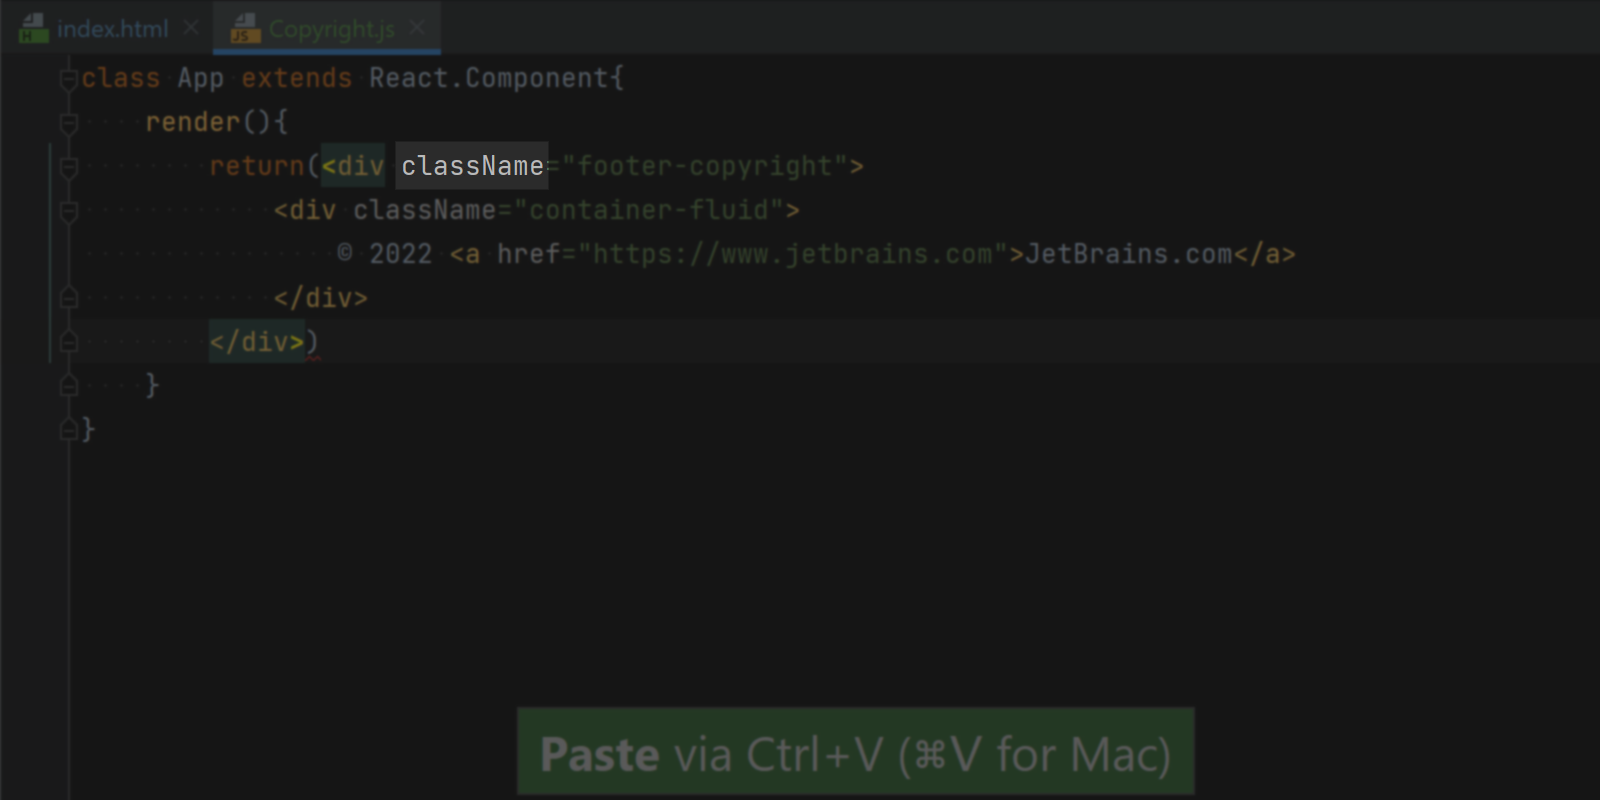 WebStorm automatically changing class to className as per React conventions